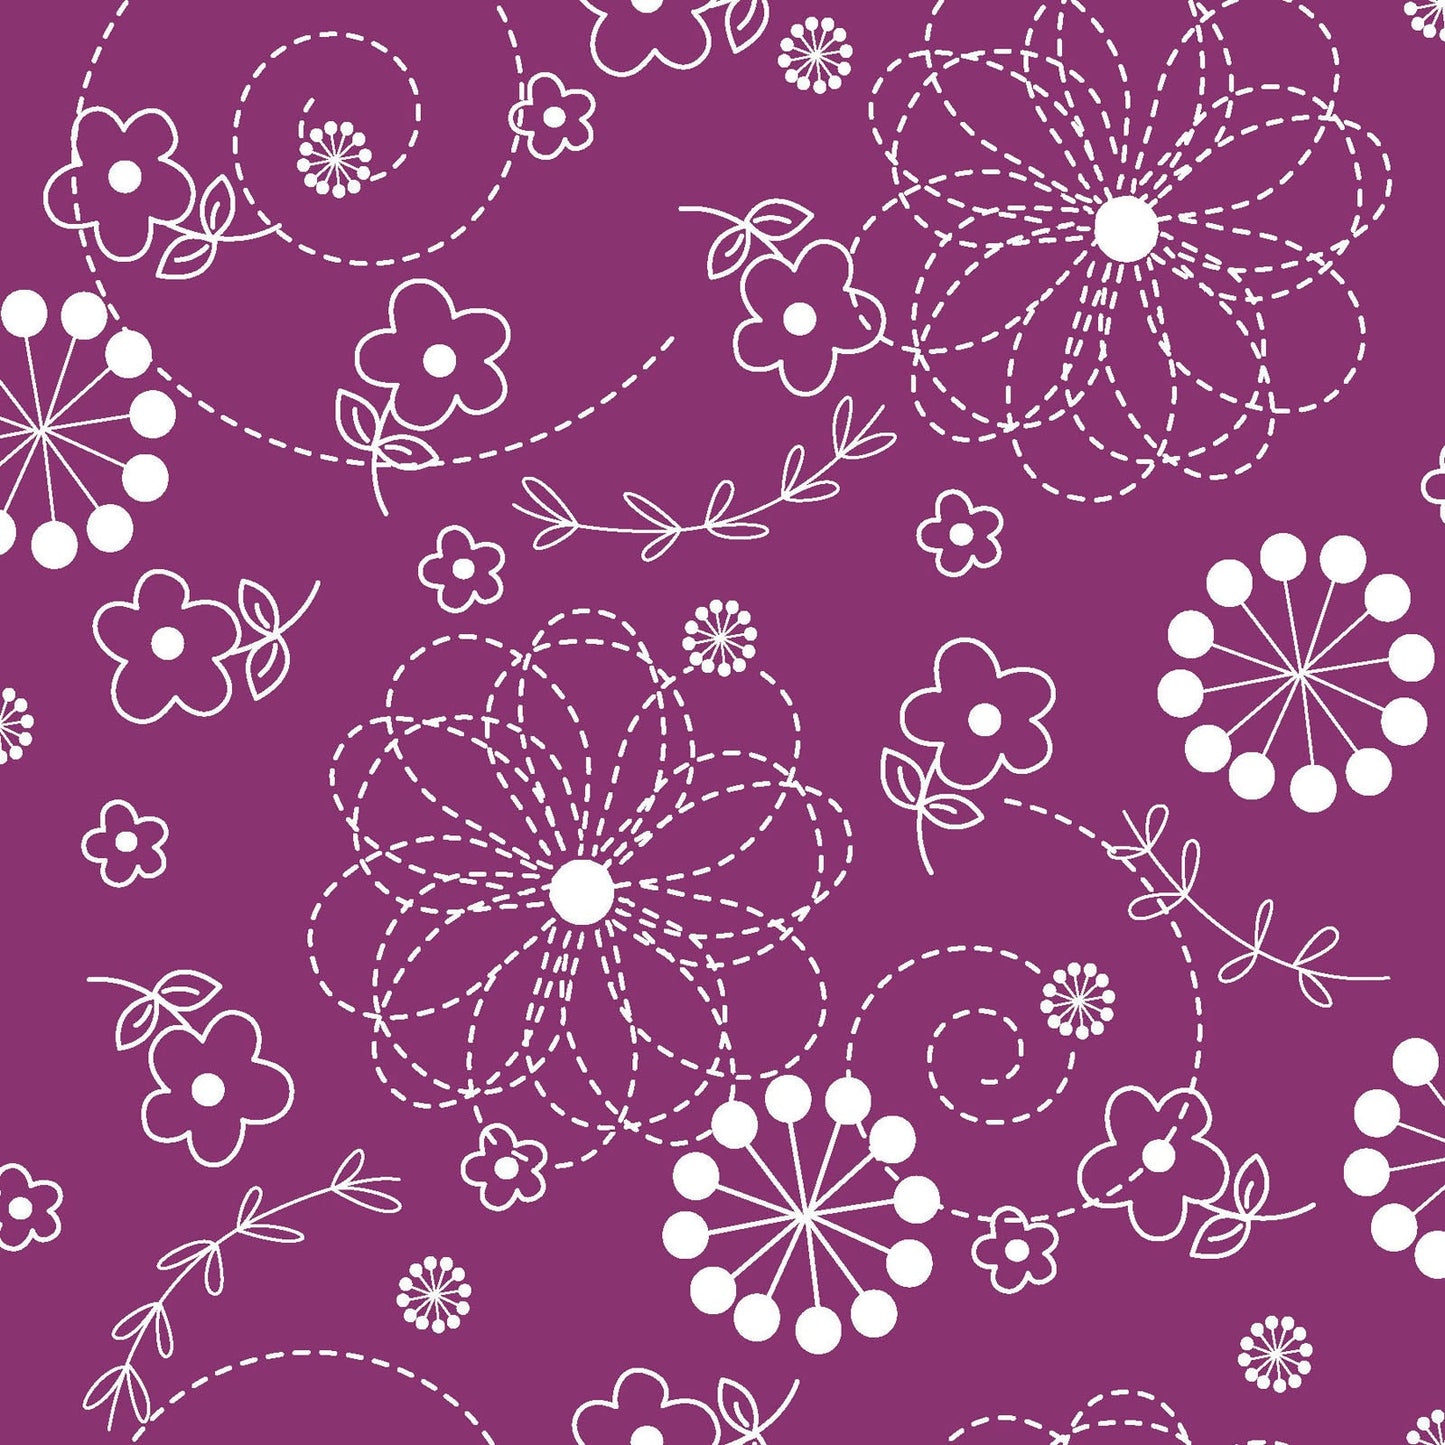 White on Purple Doodles is part of the Kimberbell Basics line designed by Kim Christopherson for Maywood Studio. This fabric features white, Pin-stitched flowers and dandelion bursts on a purple background.